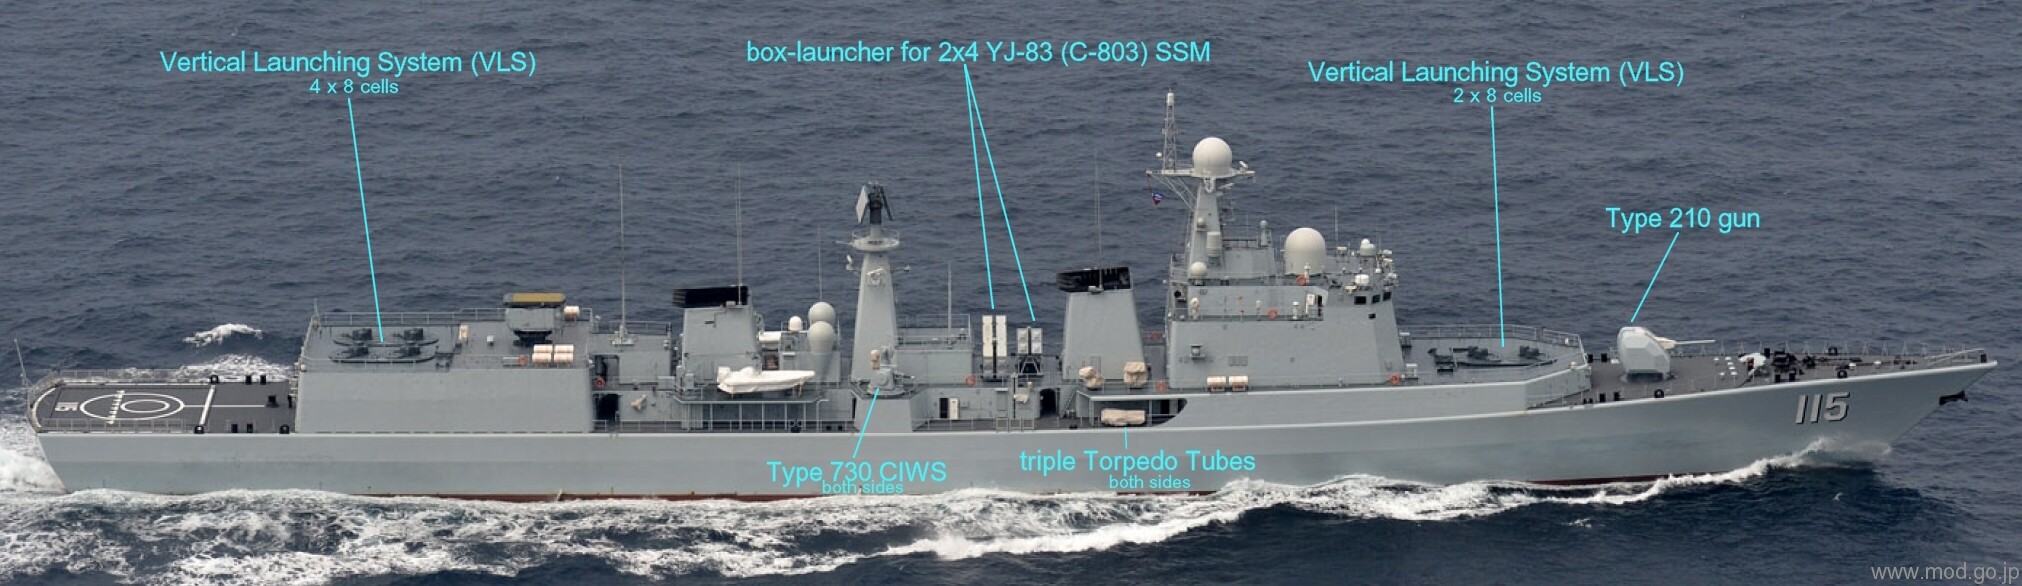 type 051c luzhou class guided missile destroyer people's liberation army navy china s-300fm sa-n-20 sam yj-83 c-803 ssm type-730 ciws vls armament 02